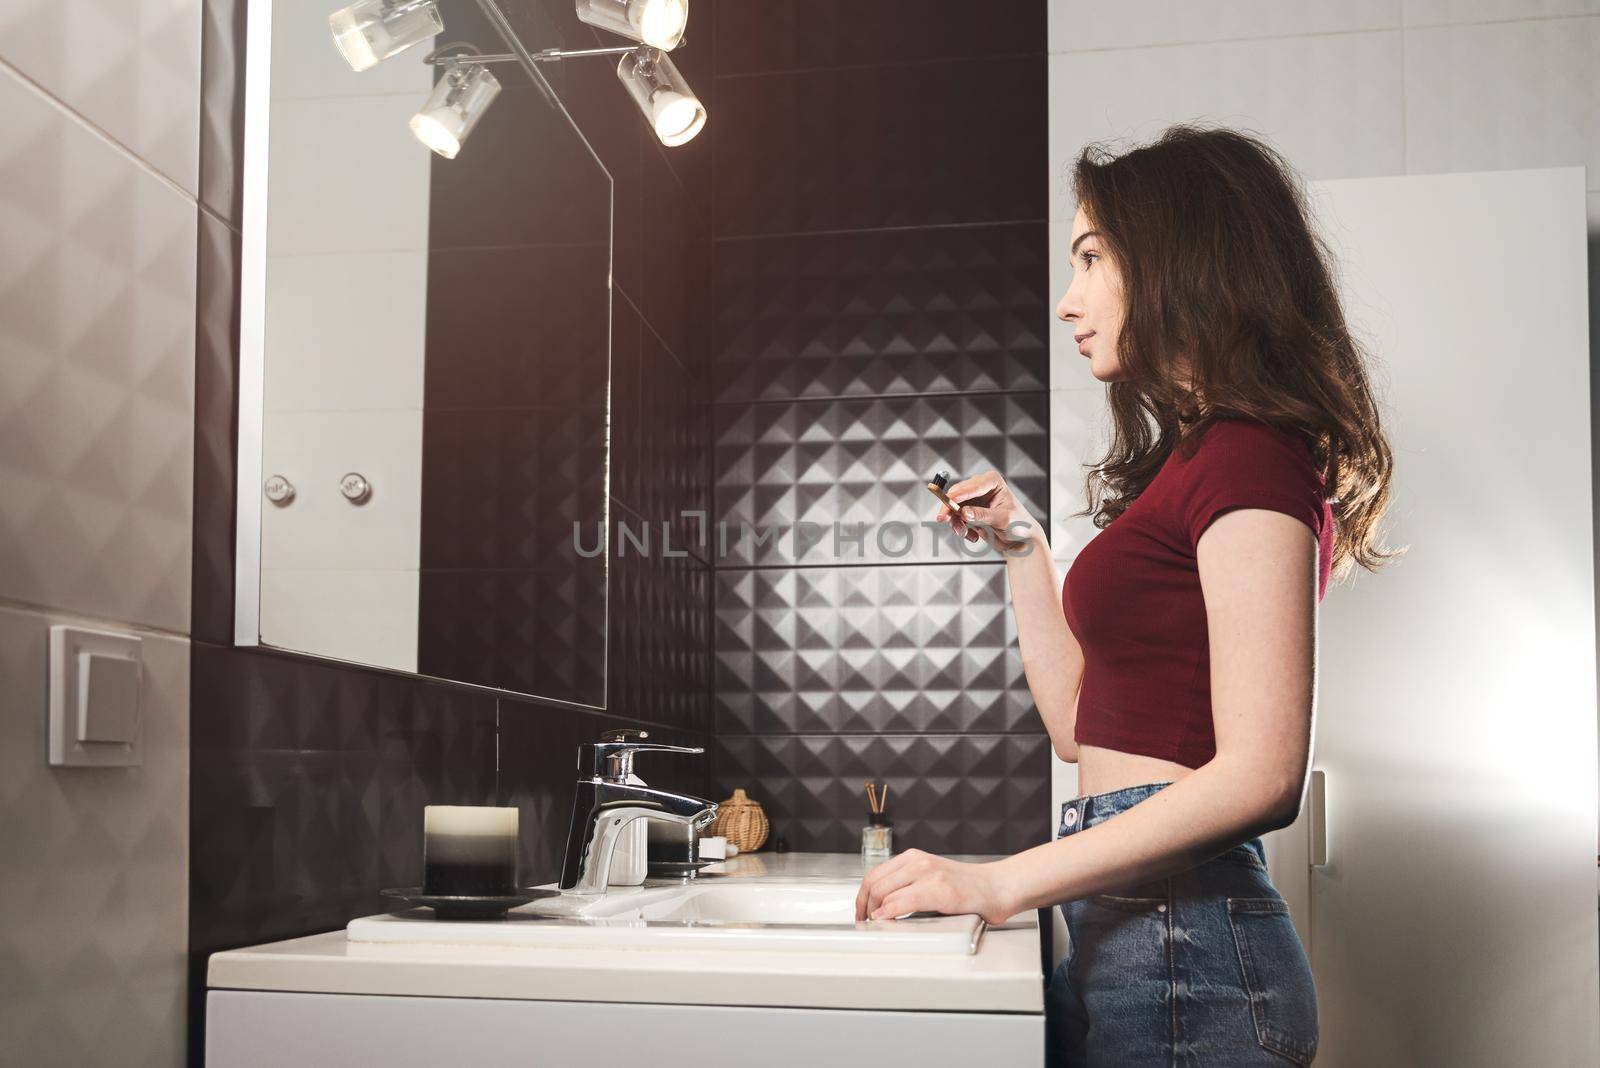 Woman brushing her teeth. Young woman in a burgundy top and jeanse with bamboo brush in front of the mirror. by Ashtray25